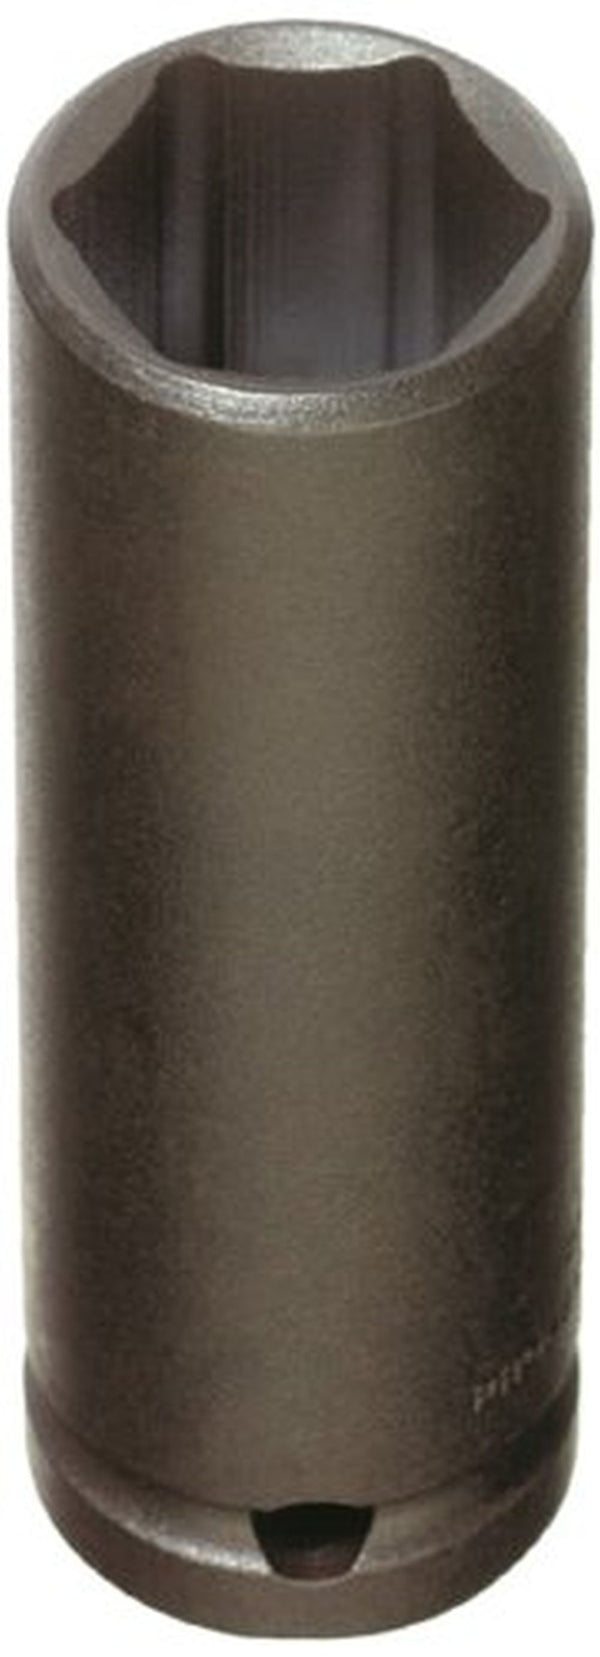 Stanley Proto J7324HT 1/2 in. Drive 6 Point 3/4 in. SAE Thin Wall Deep Impact Socket